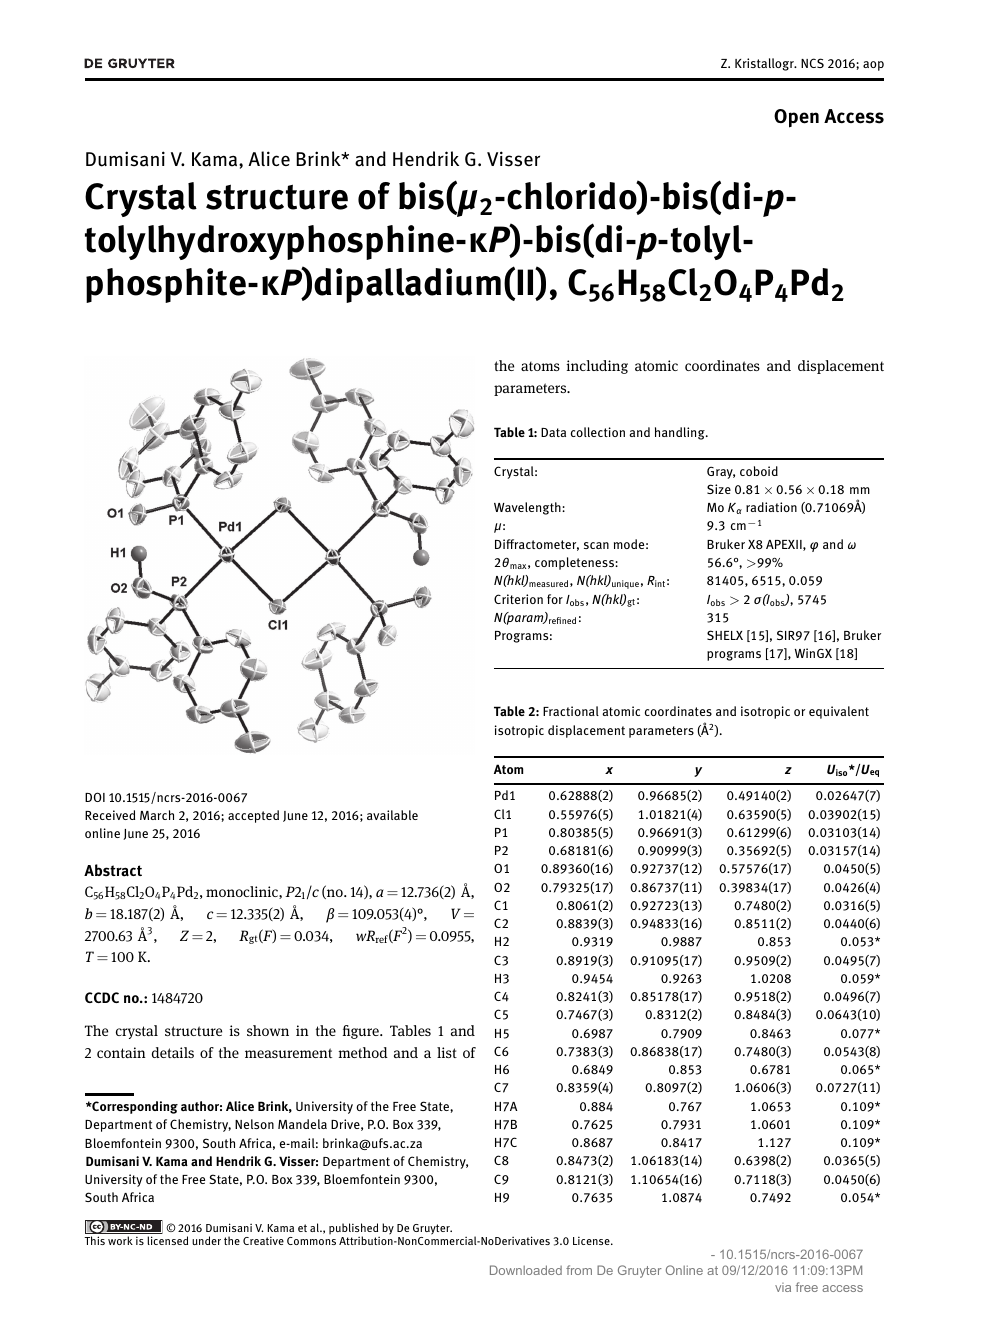 Crystal Structure Of Bis M2 Chlorido Bis Di P Tolylhydroxyphosphine Kp Bis Di P Tolylphosphite Kp Dipalladium Ii C56h58cl2o4p4pd2 Topic Of Research Paper In Biological Sciences Download Scholarly Article Pdf And Read For Free On Cyberleninka